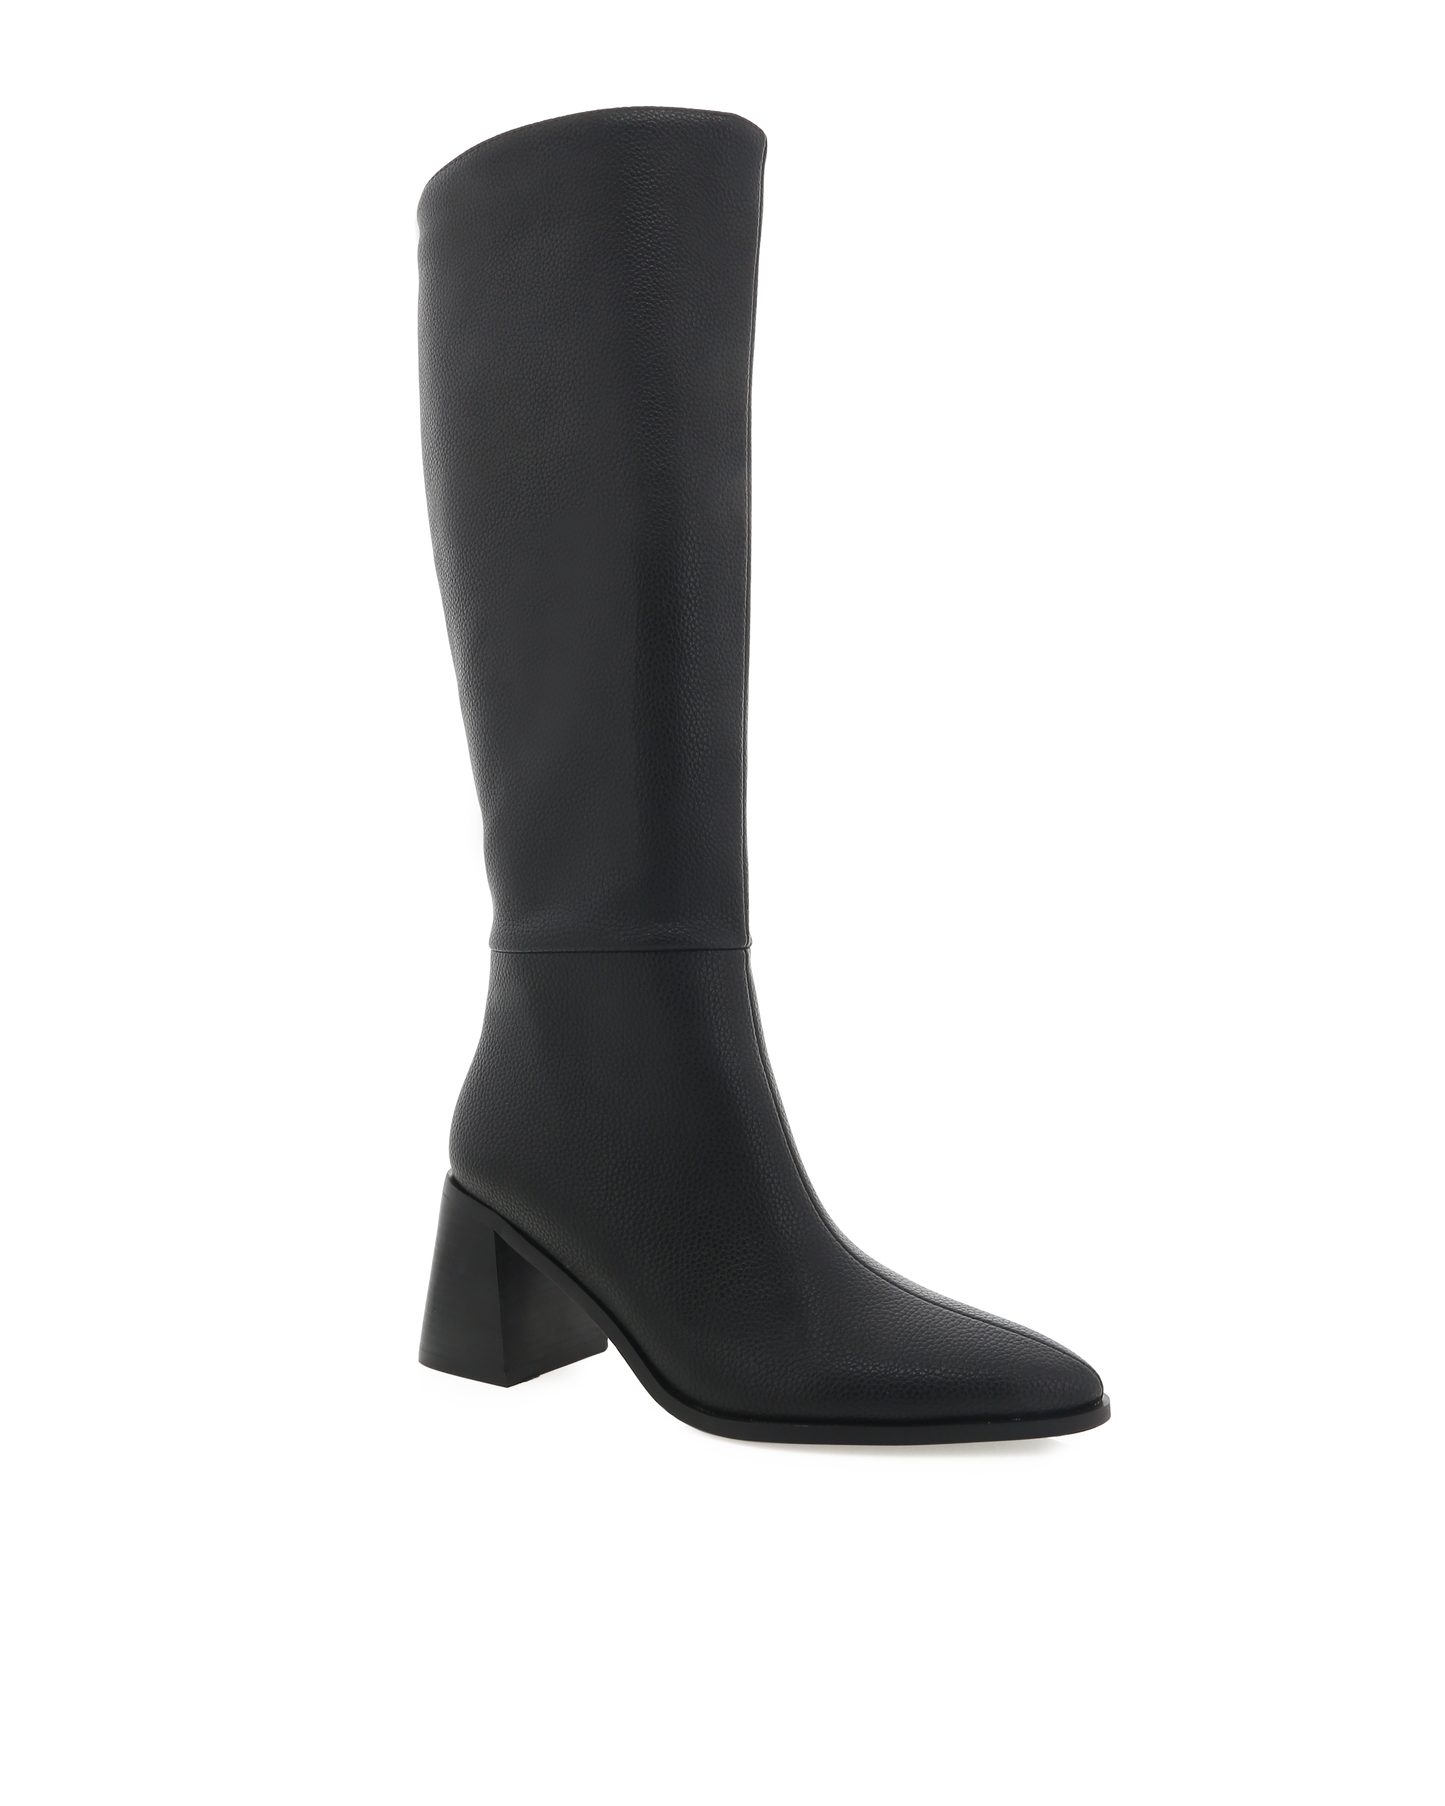 Tall black faux leather boot with a block heel